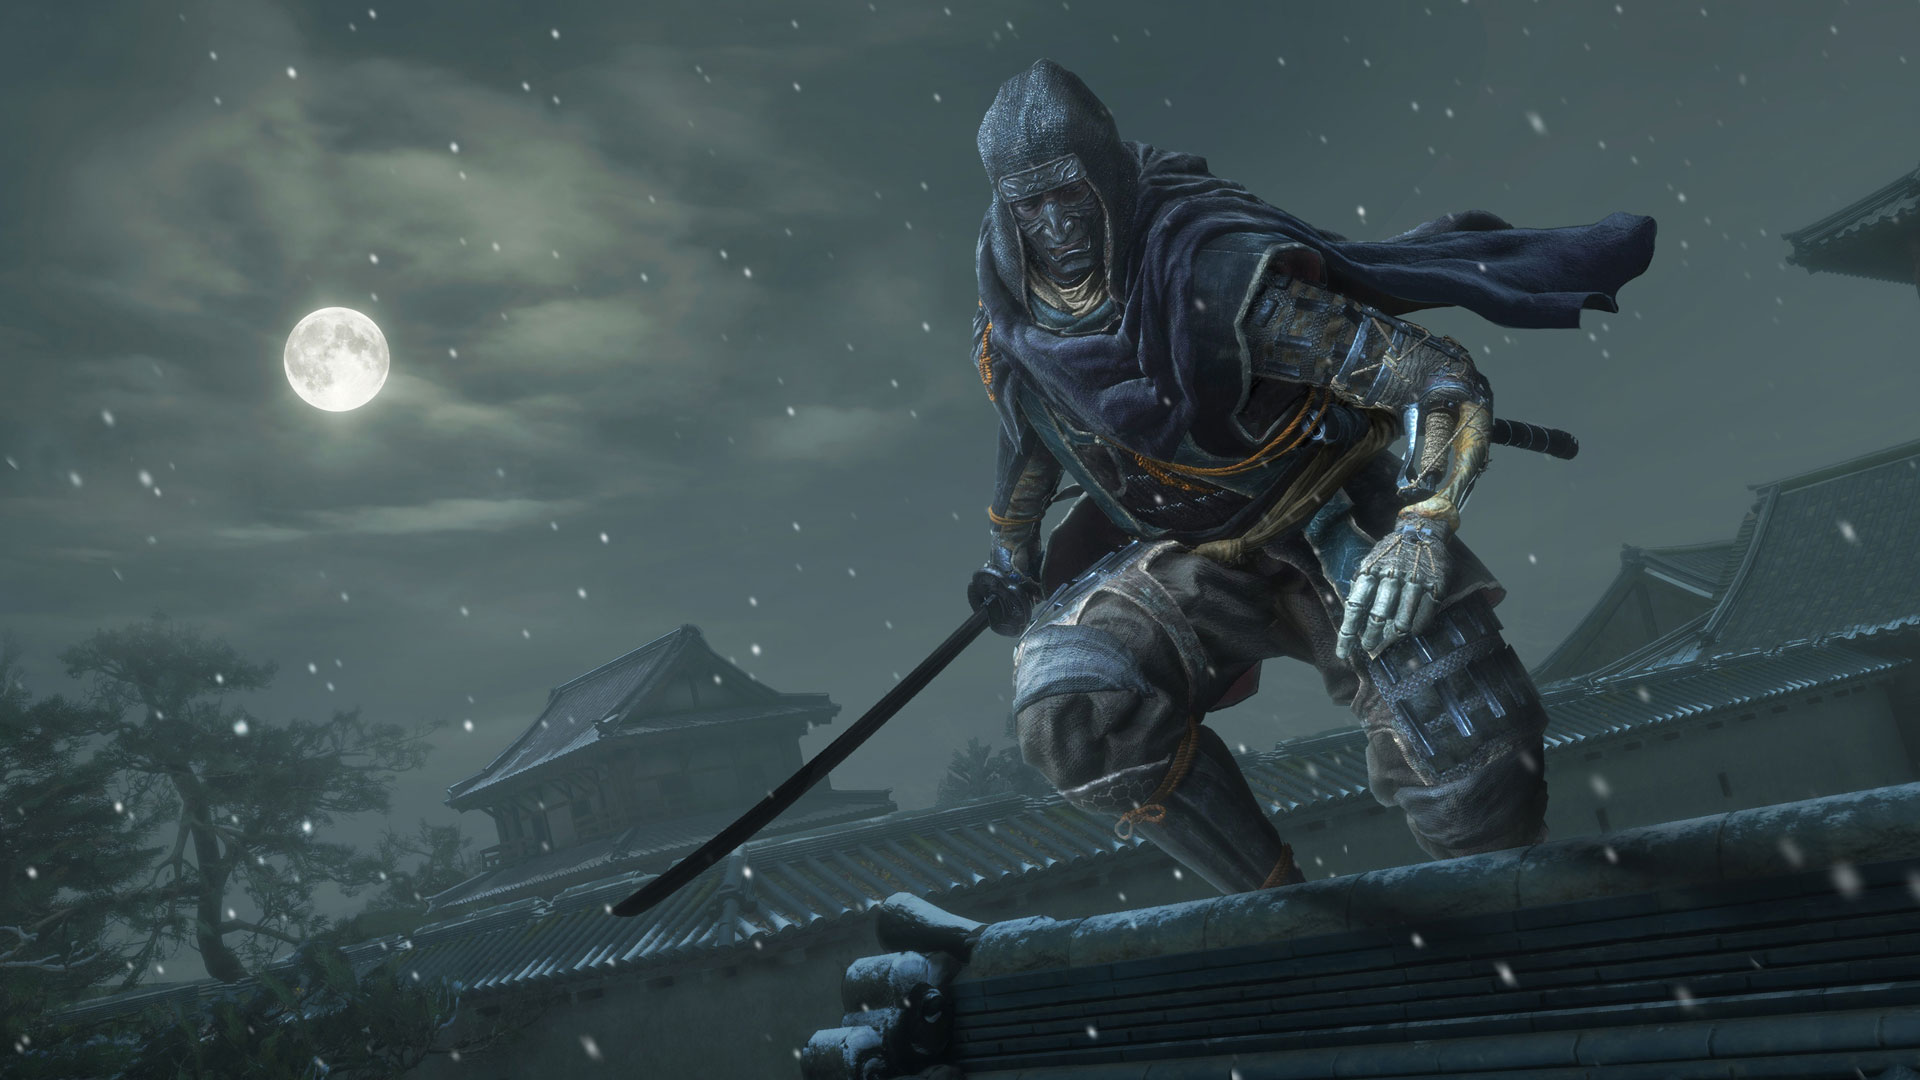 An image of the protagonist Ninja from Sekiro in a the new DLC costume, resembling Samurai armor.